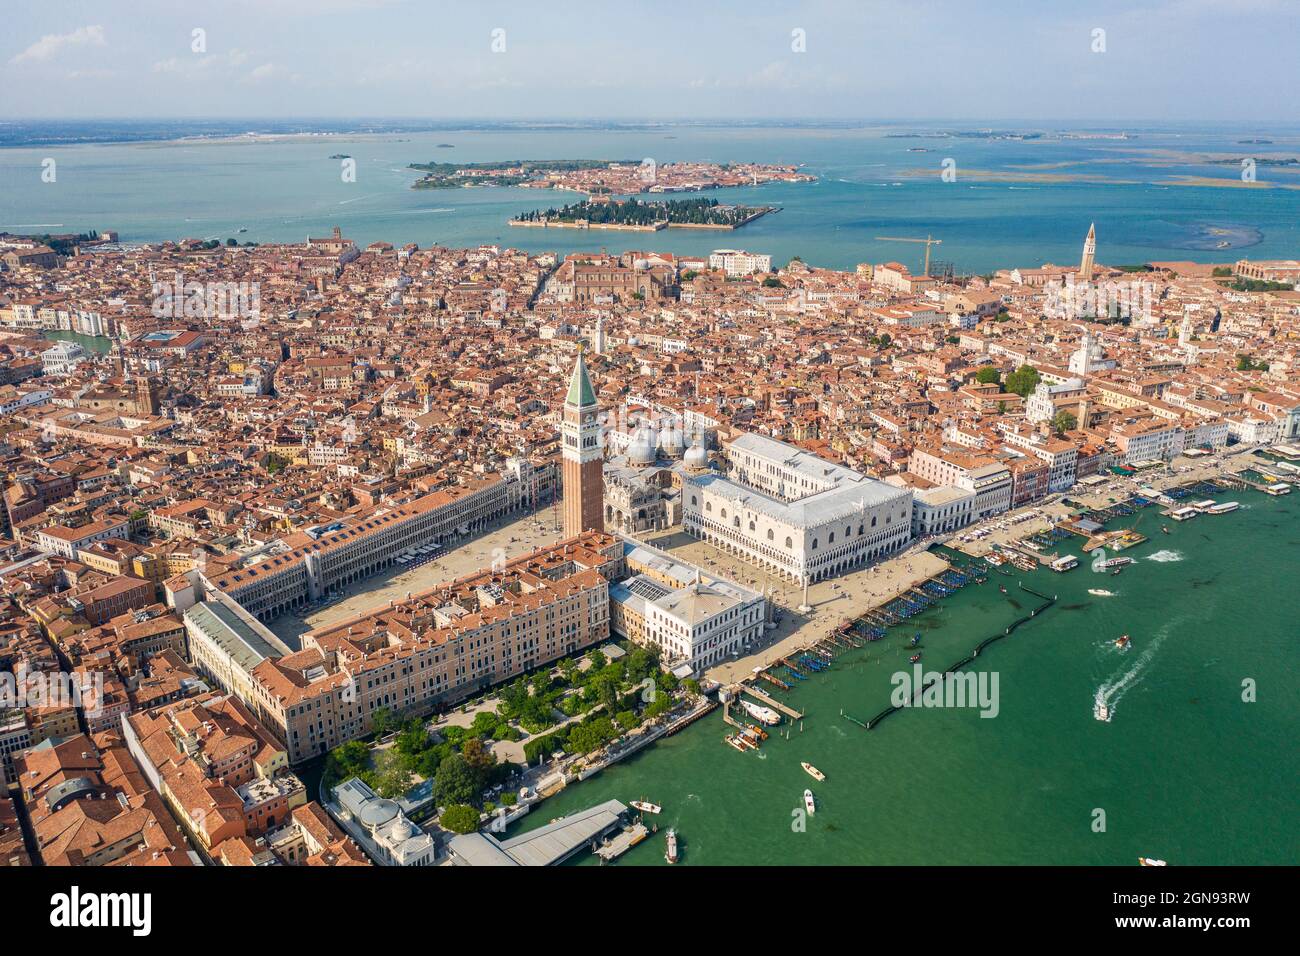 Italy, Veneto, Venice, Aerial view of Piazza San Marco with Doges Palace and Saint Marks Campanile Stock Photo